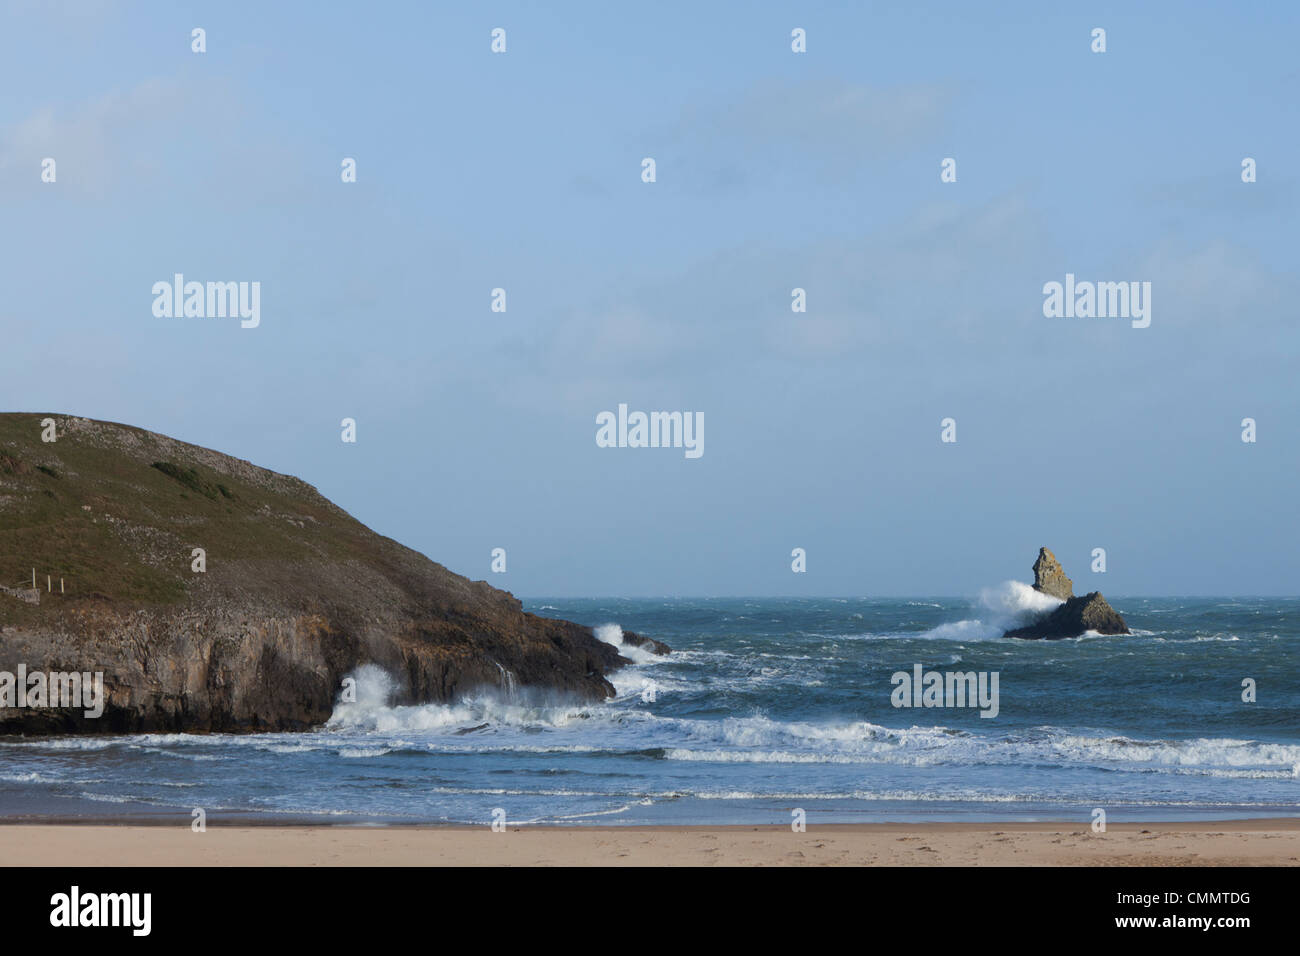 Large waves break over rocks at Broadhaven Beach, West Wales. Stock Photo